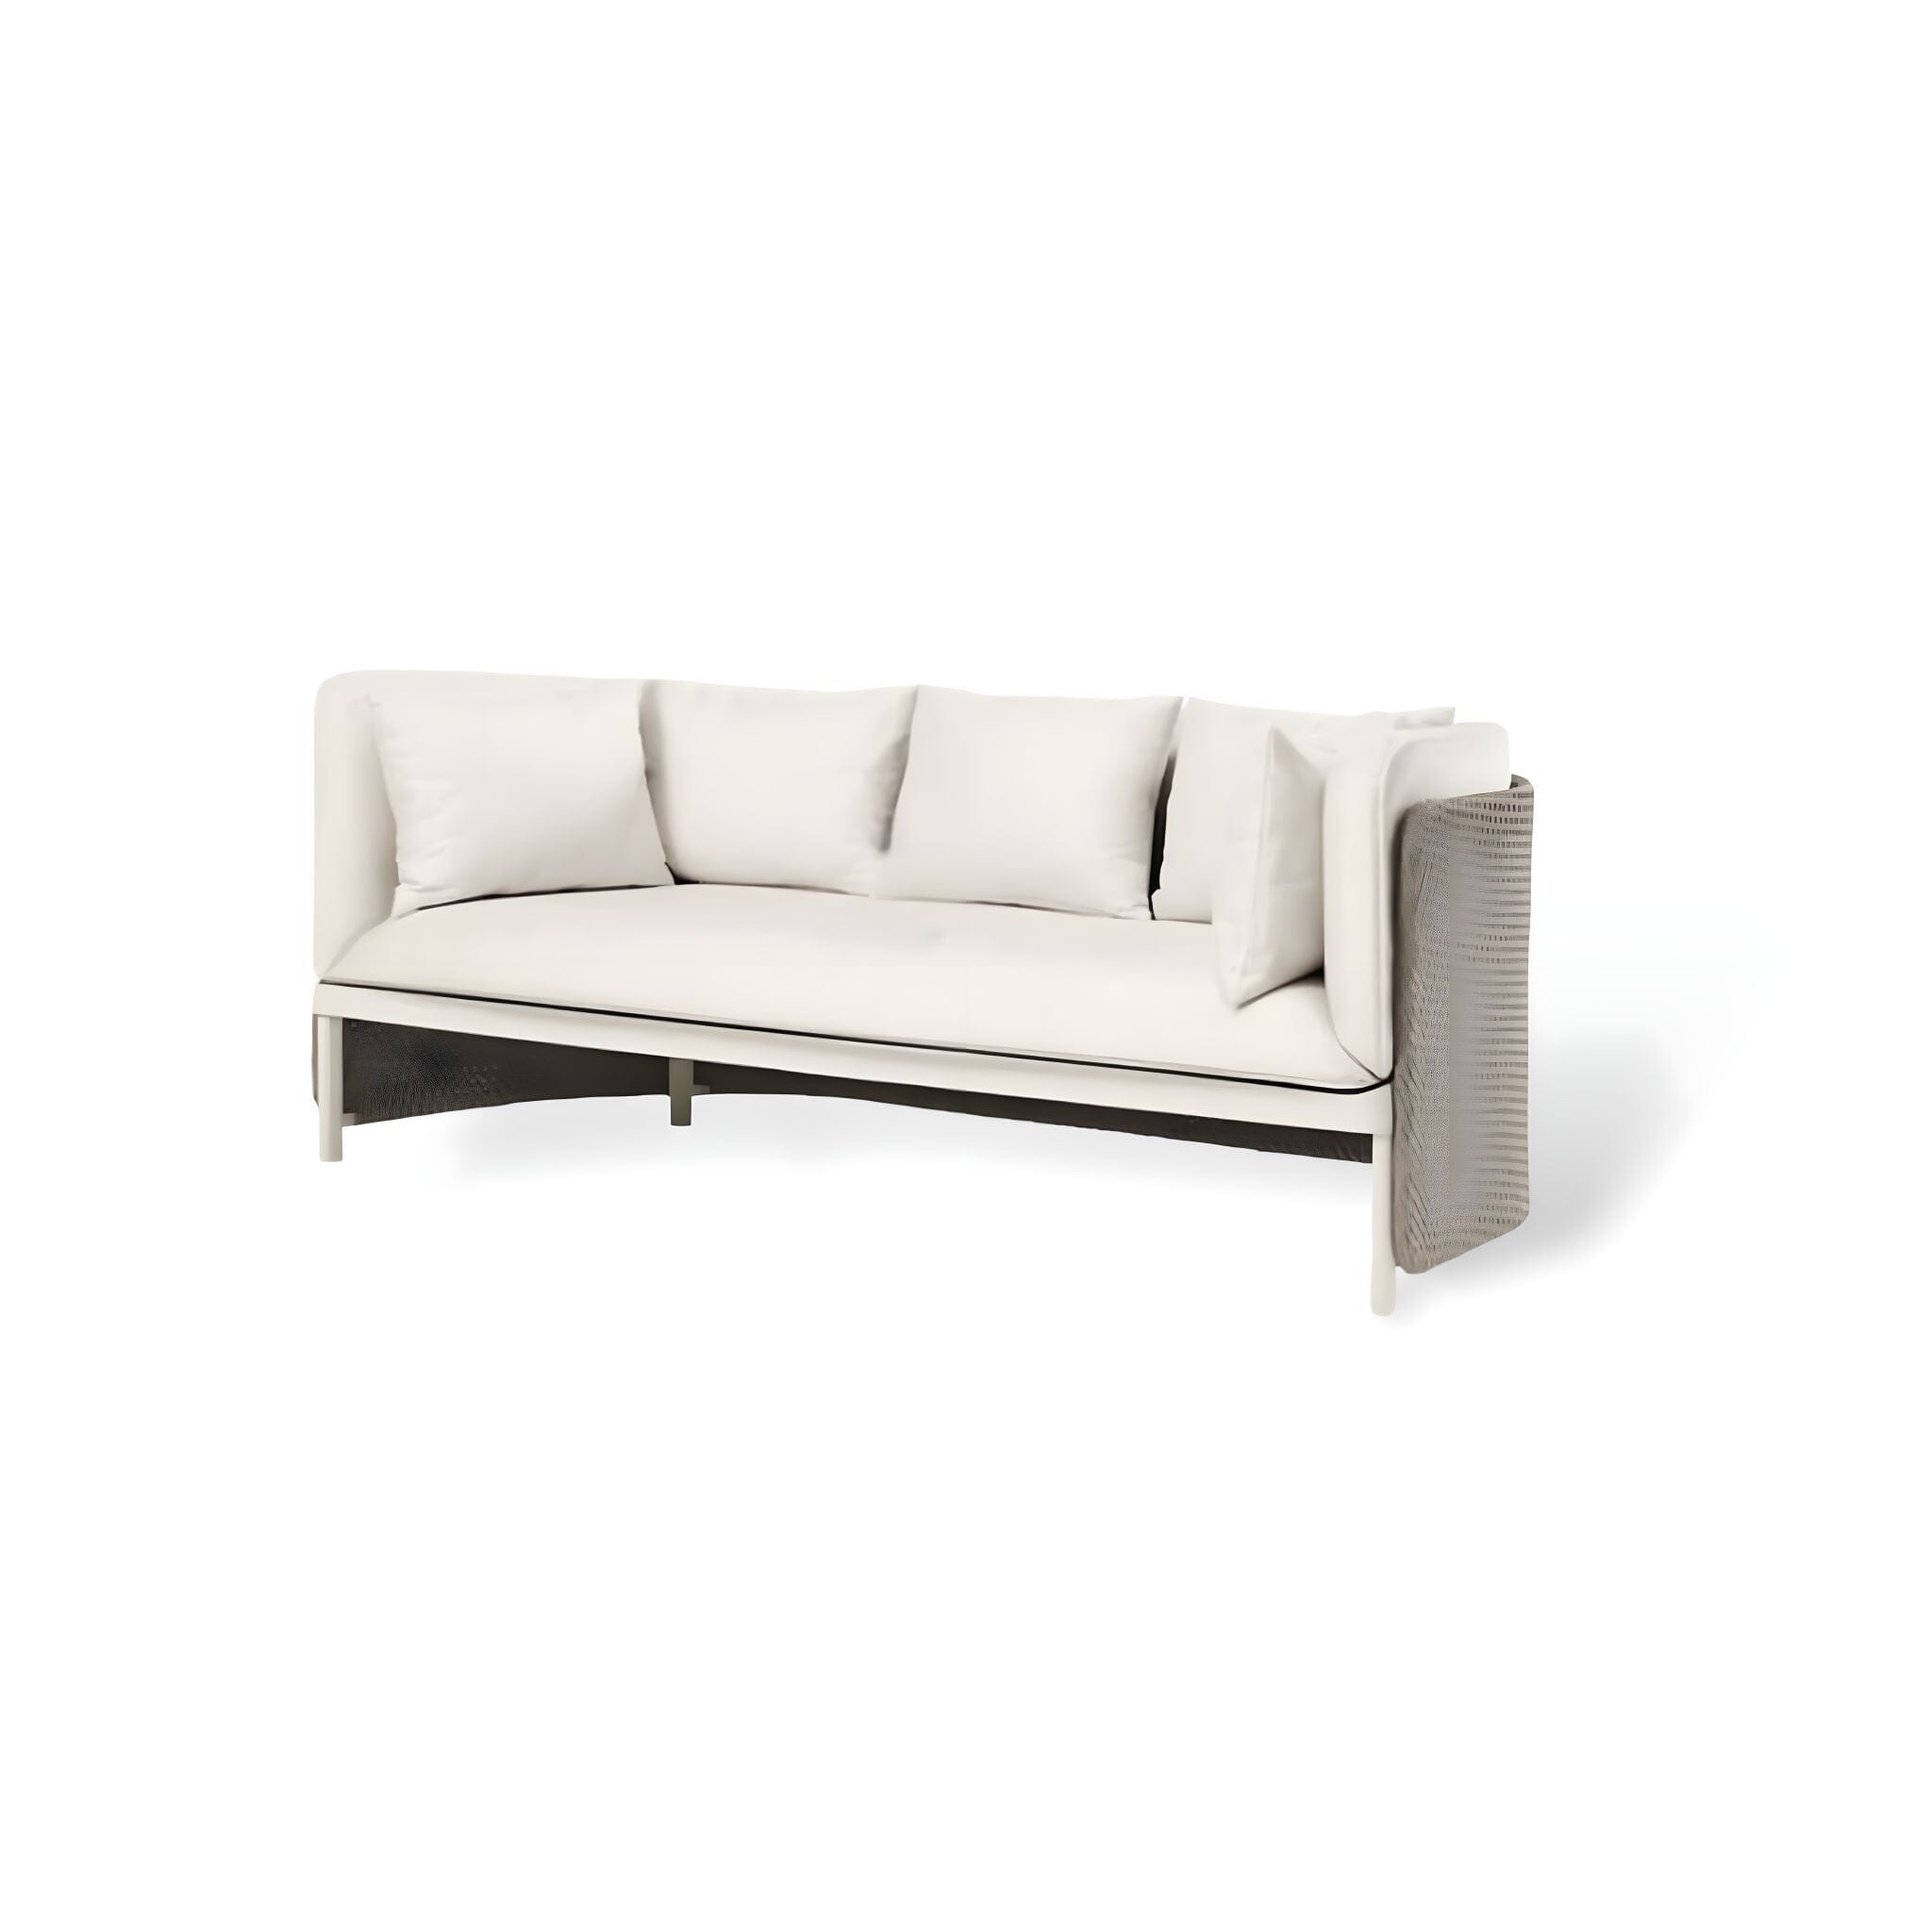 Terrasse Outdoor Collection Outdoor Furniture Three Seater - Low back Sofa 